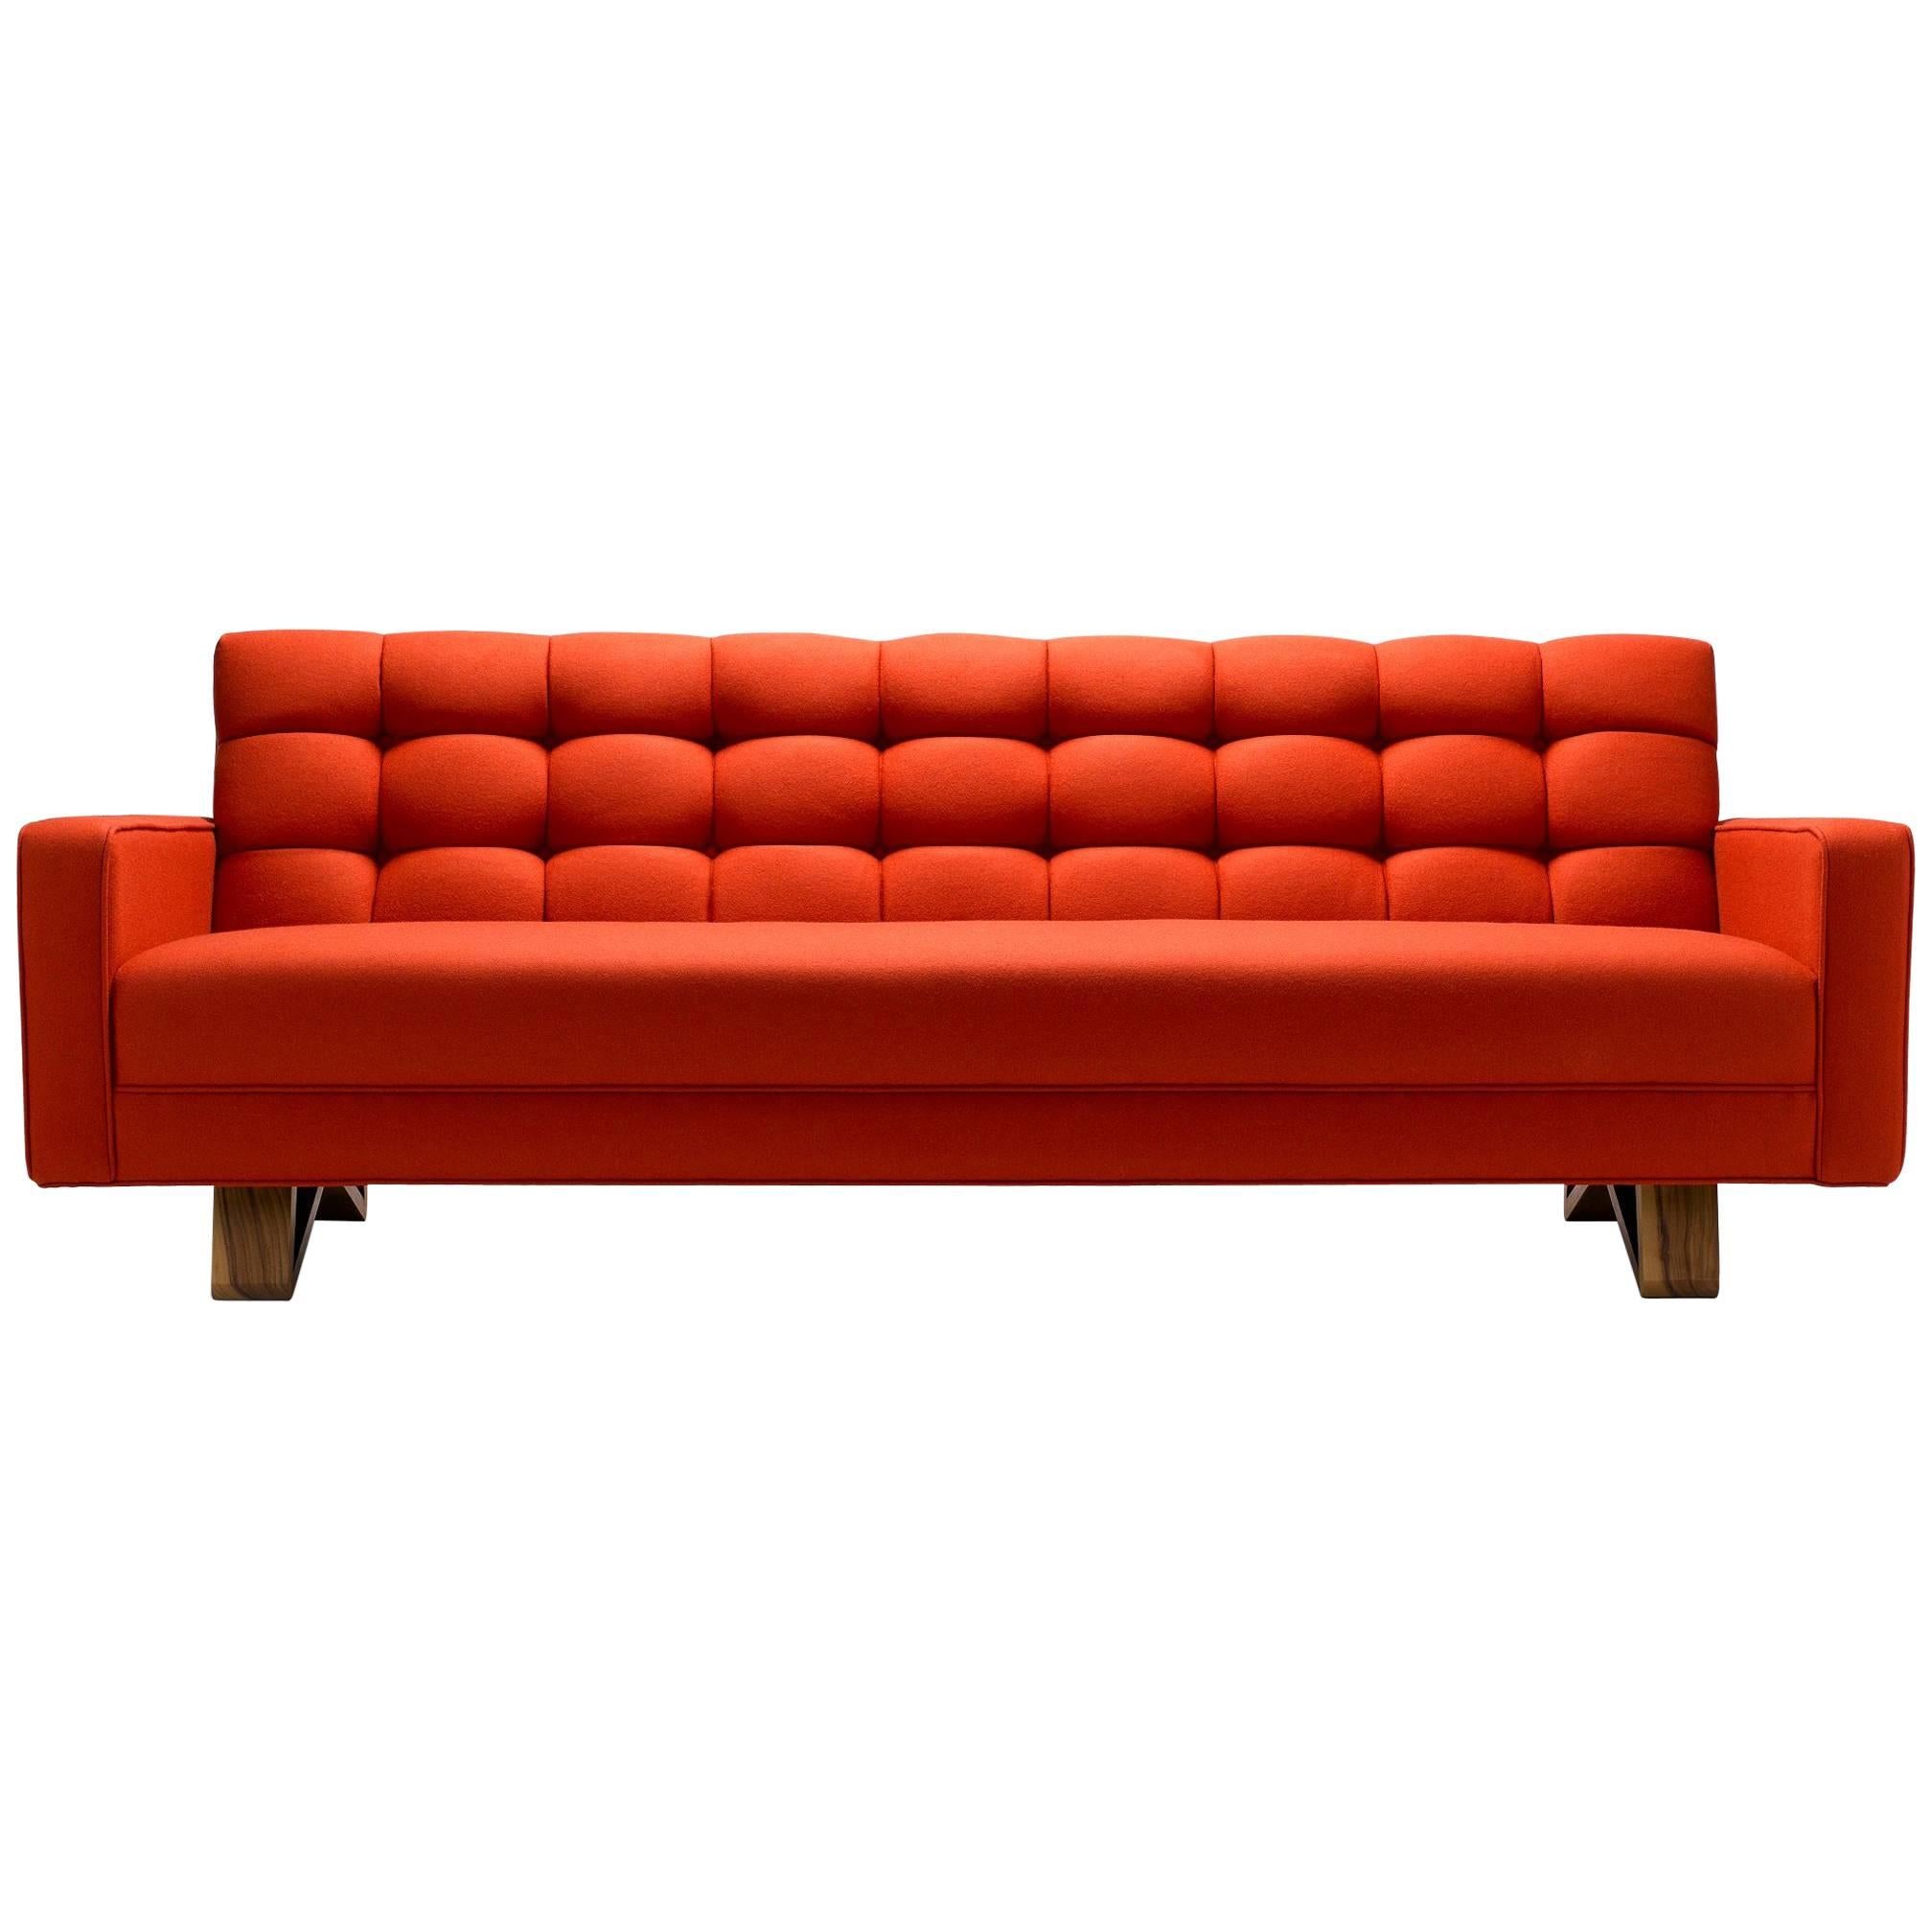 Contemporary Red Adoni Sofa in Melton Wool with Walnut Legs